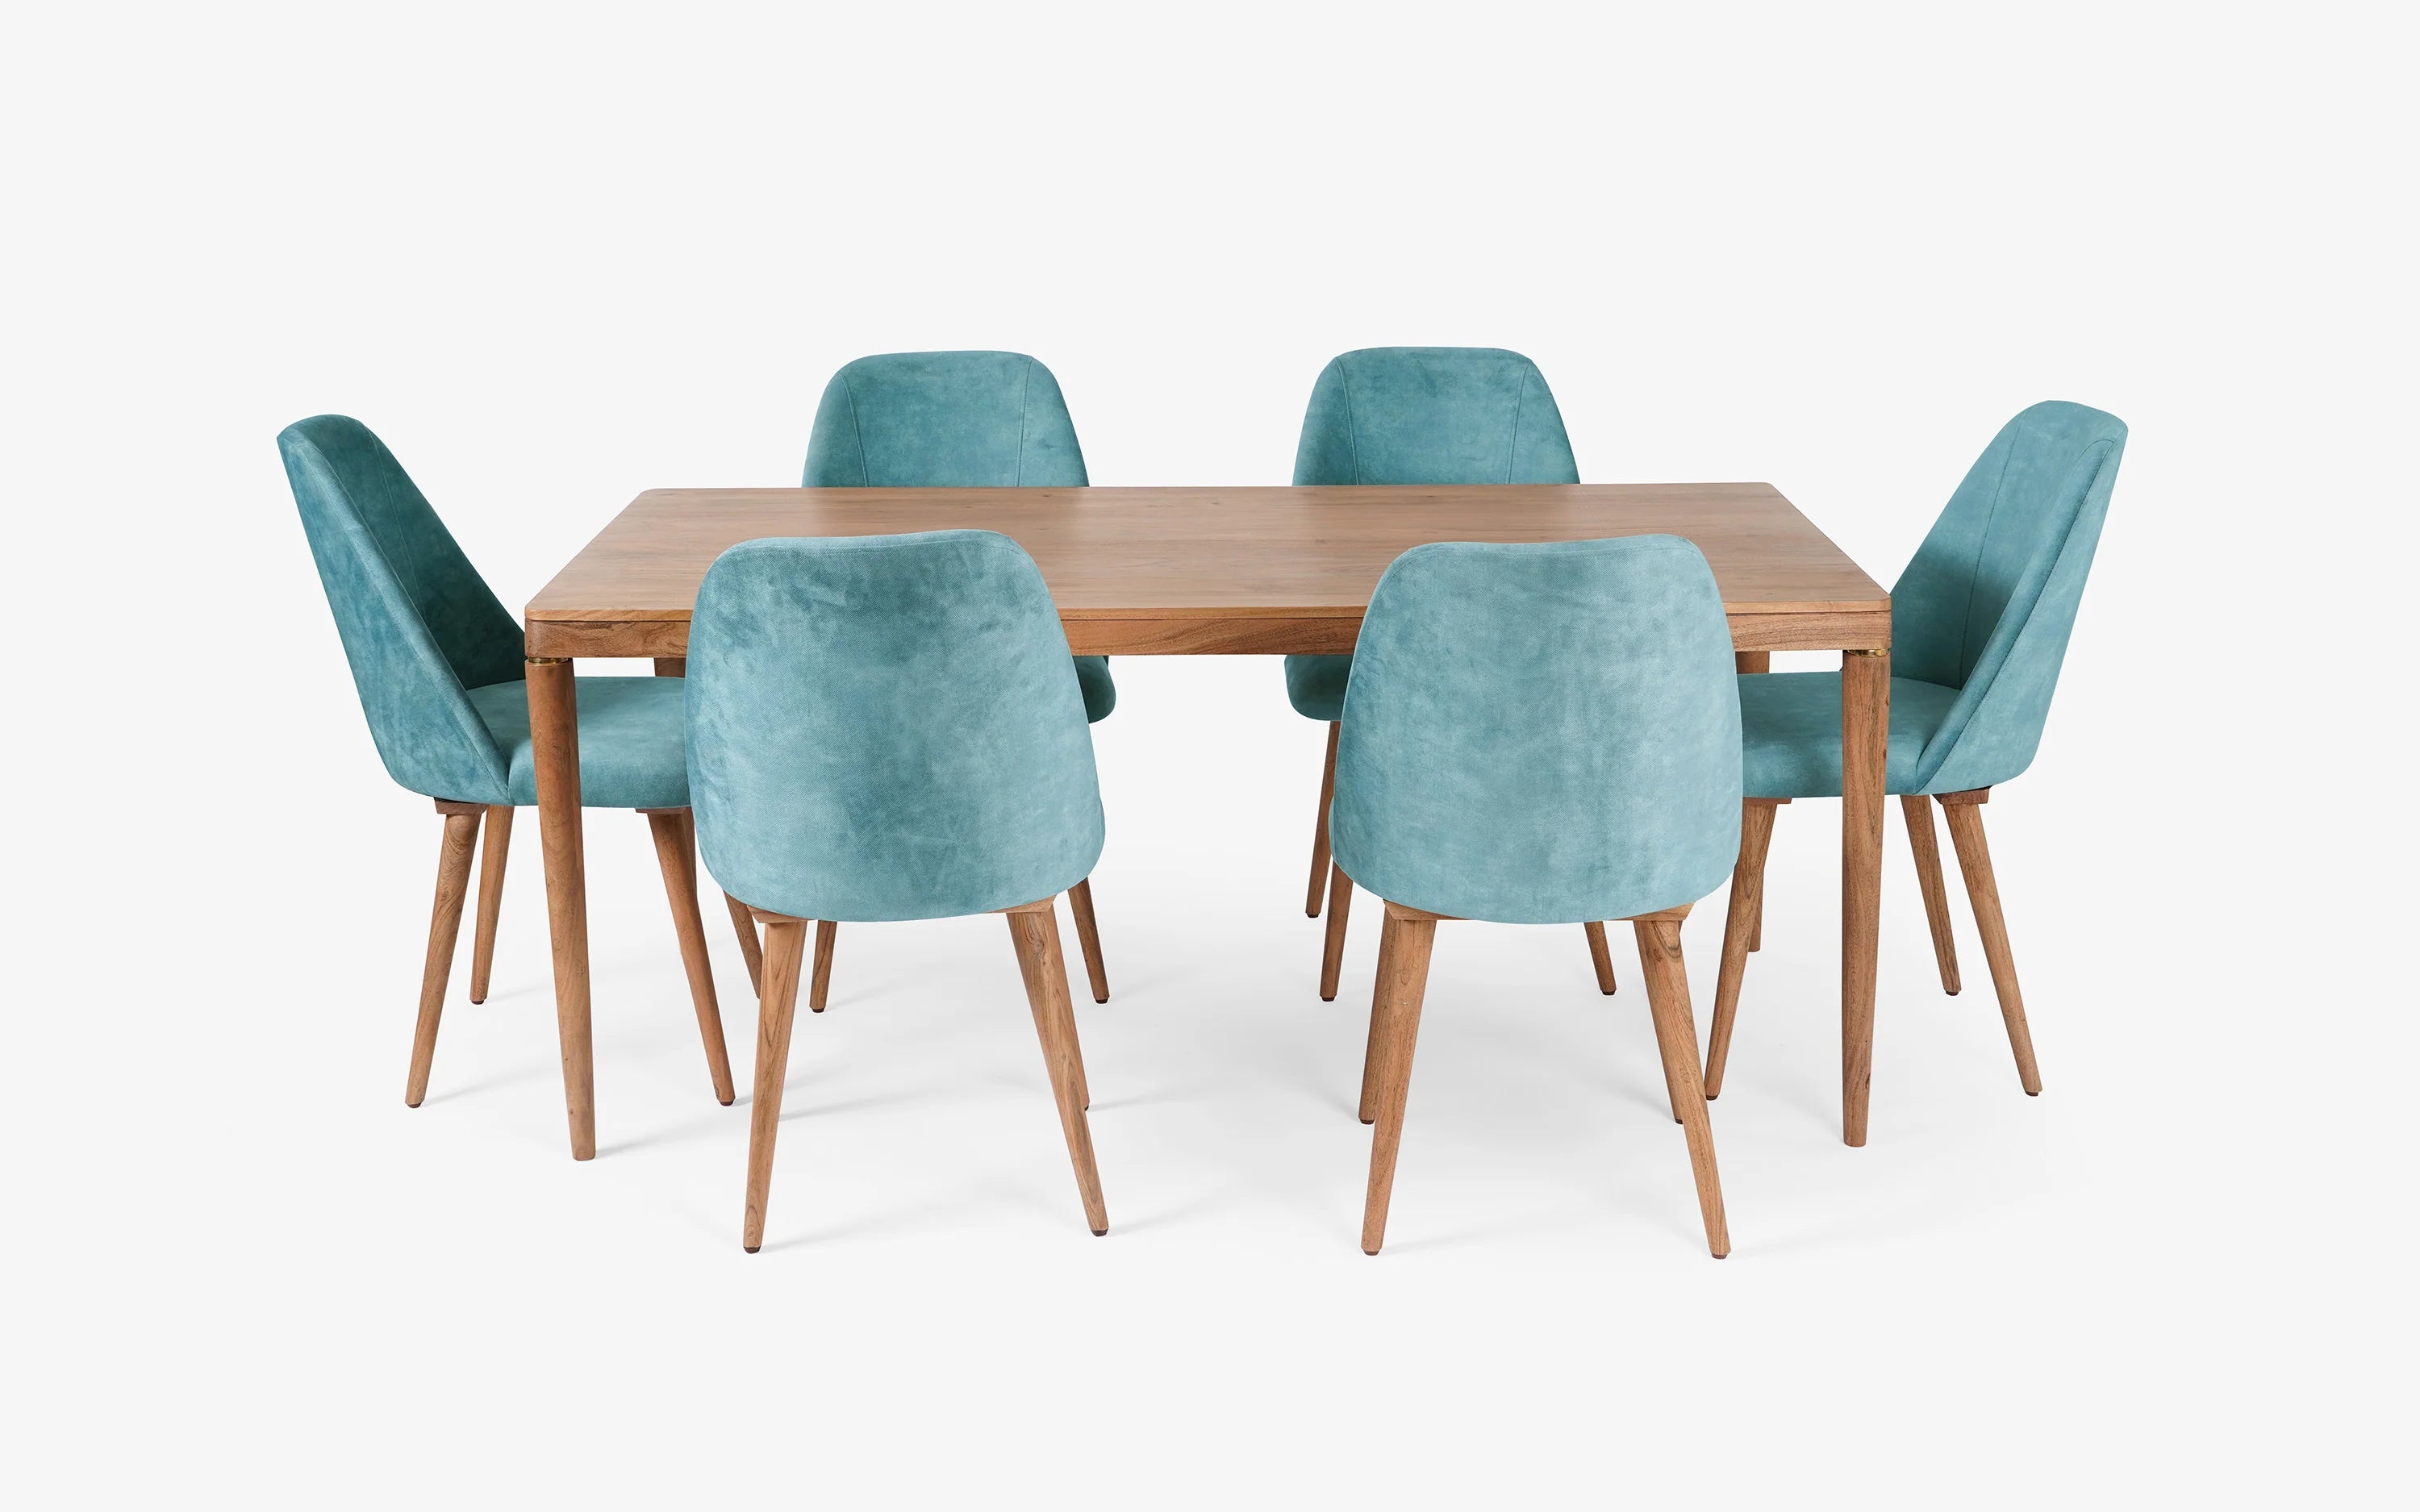 Buta Dining Table Set of 6